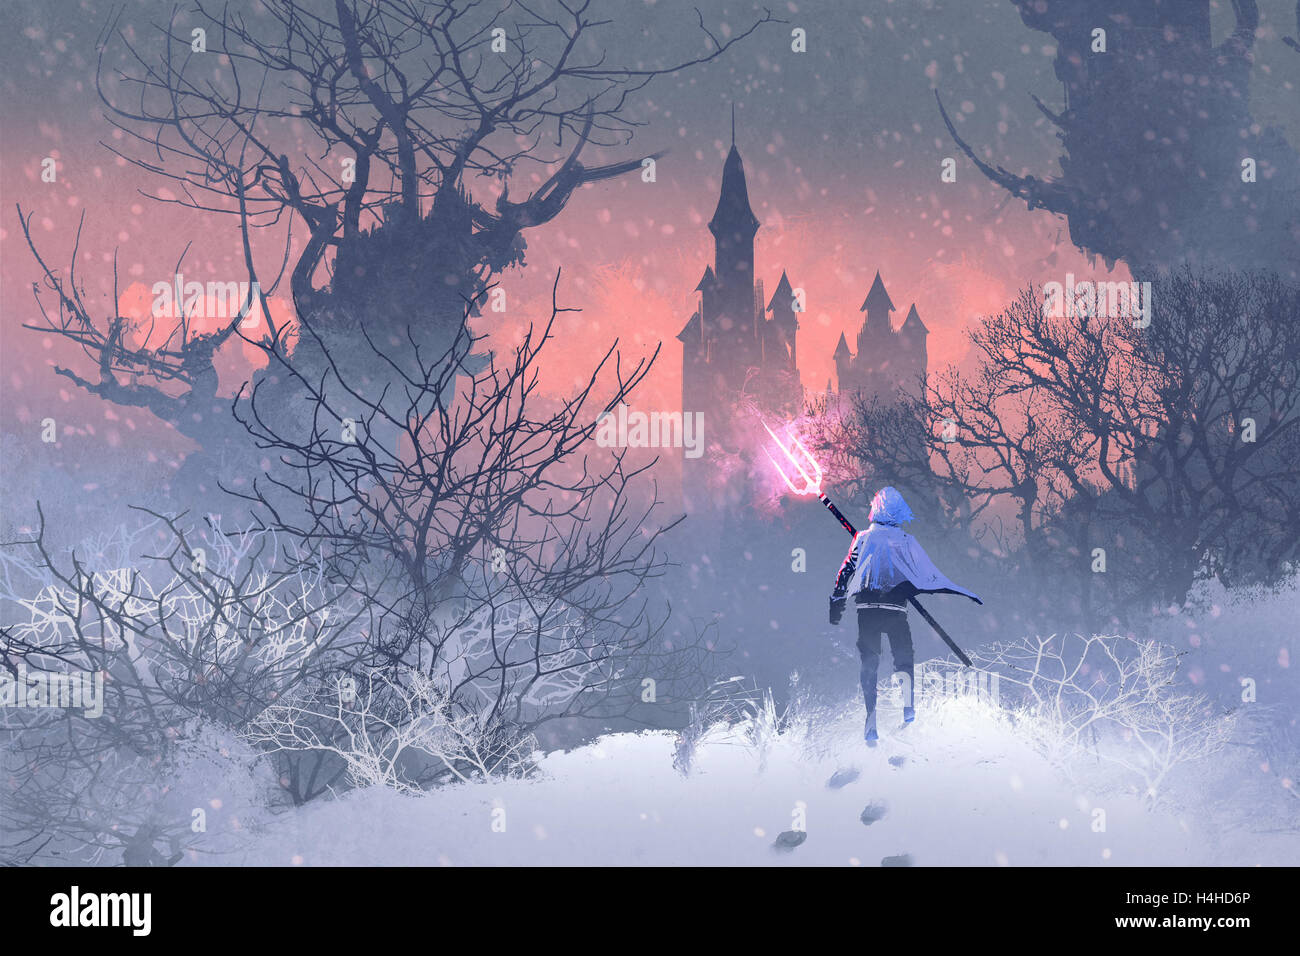 knight with trident in winter landscape,illustration painting Stock Photo